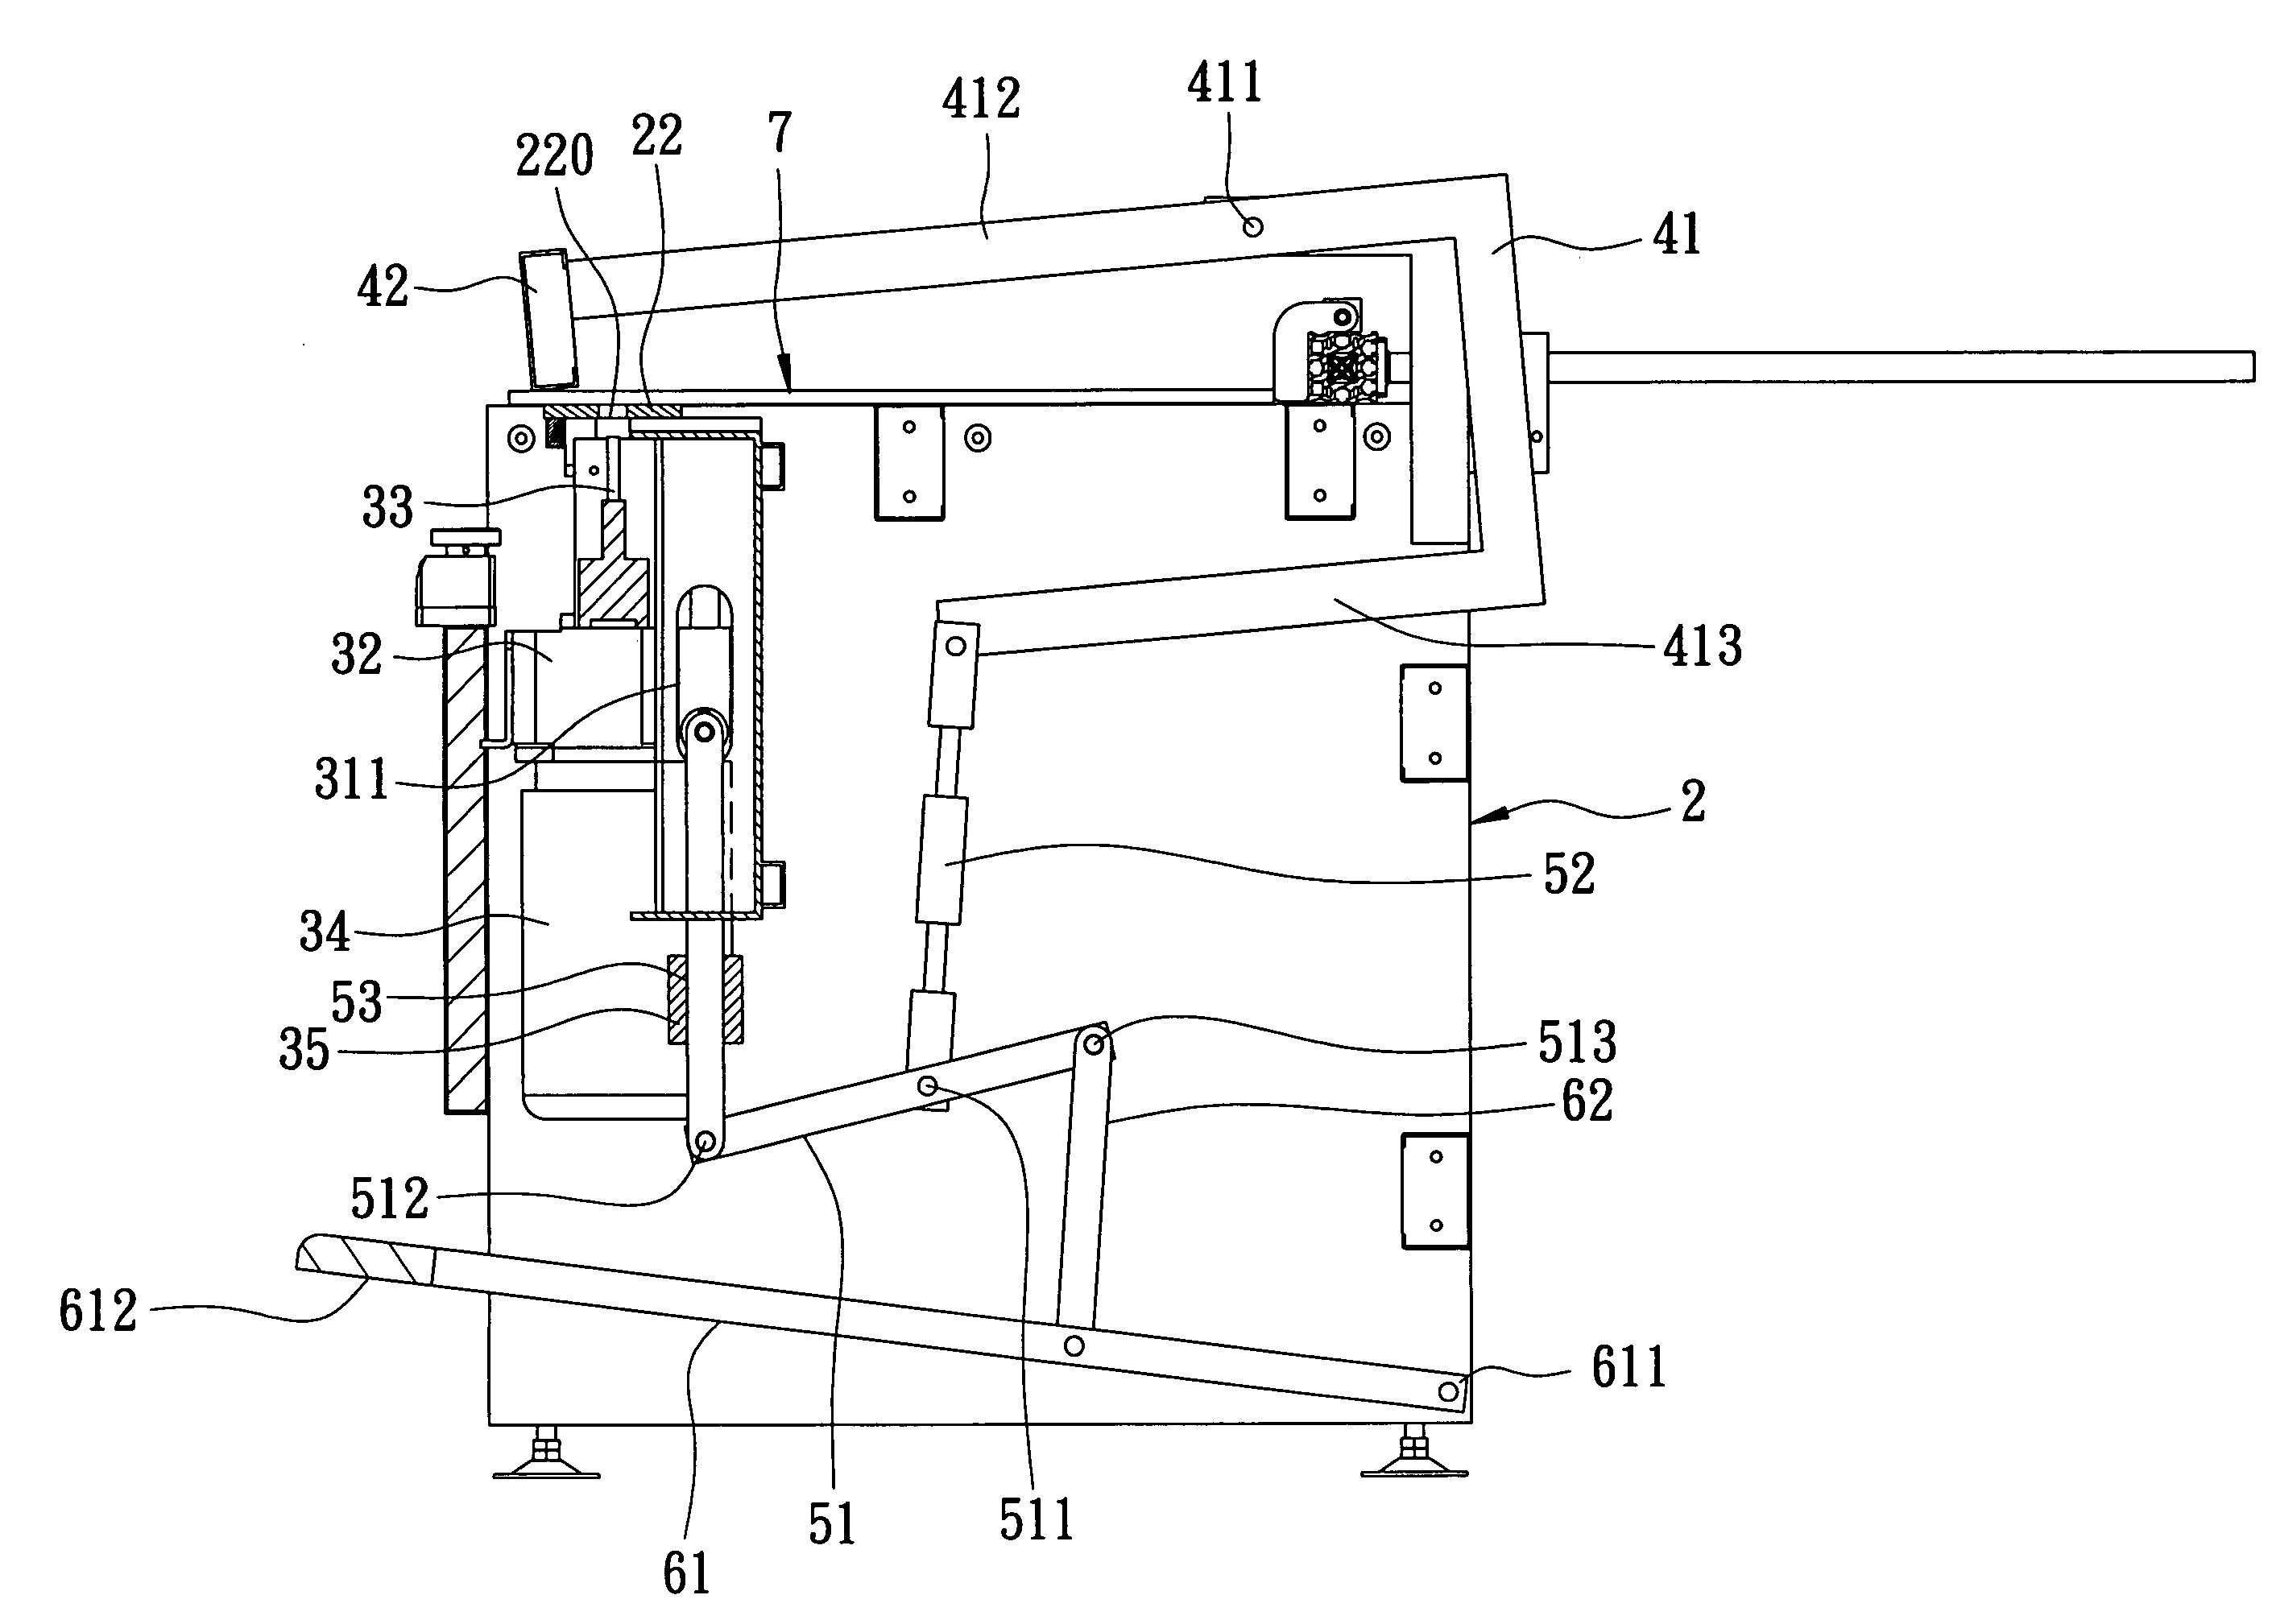 Working machine that can clamp a workpiece automatically